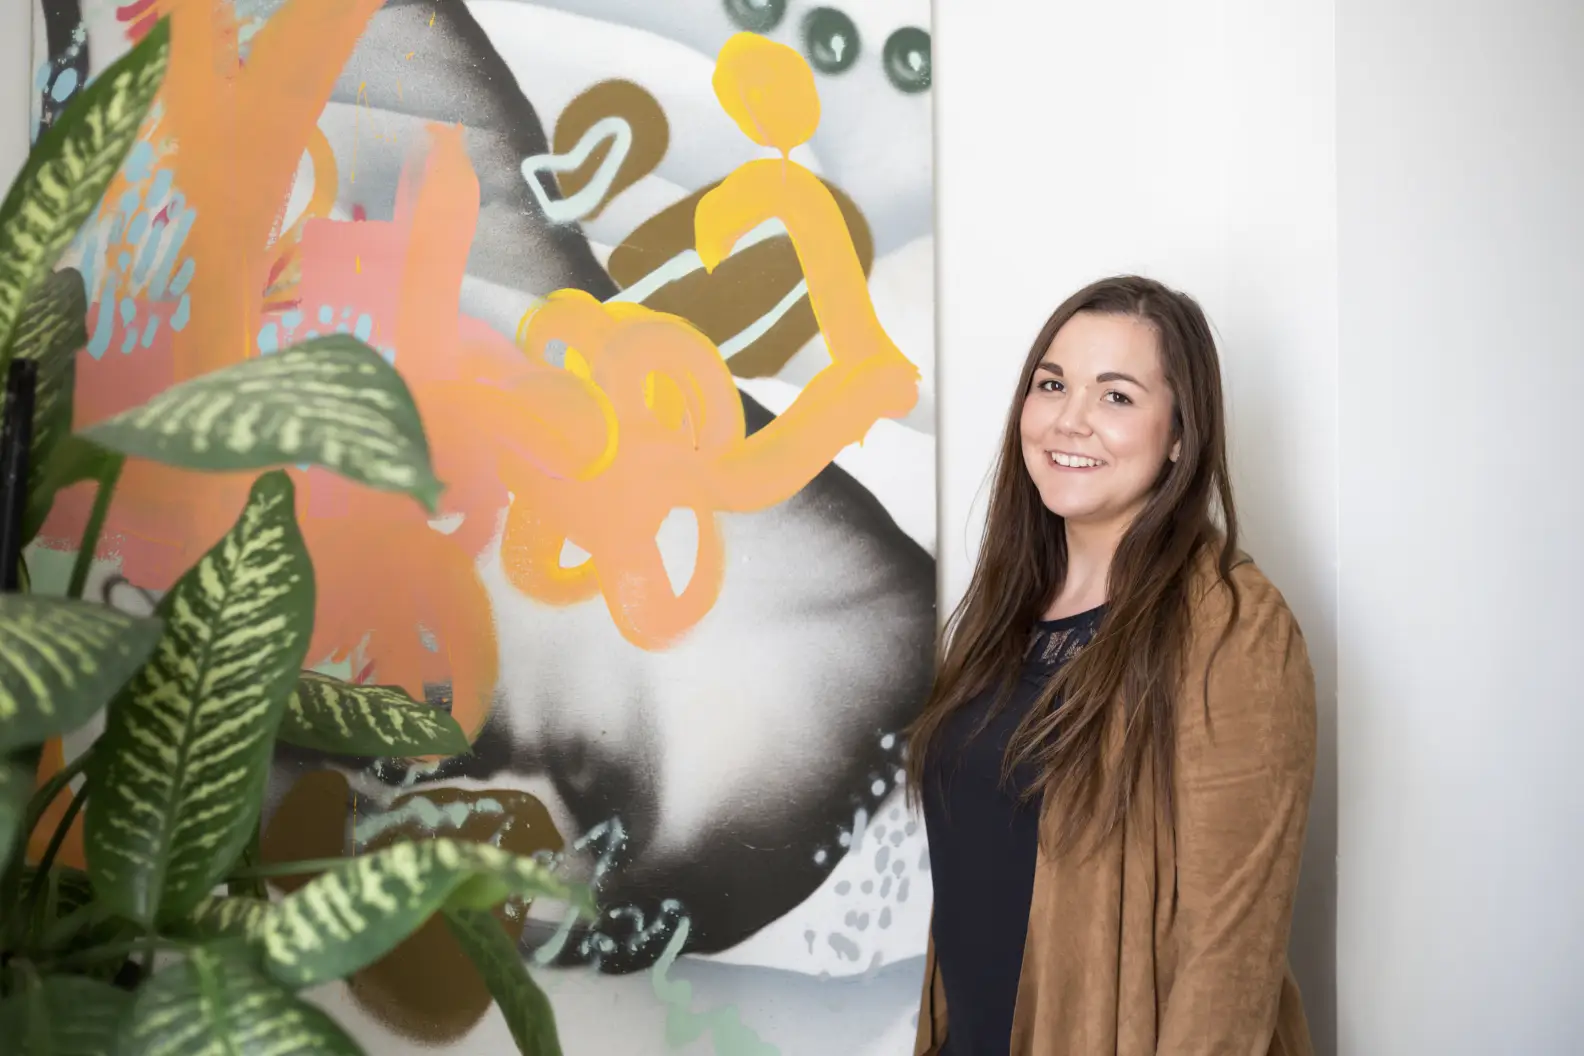 Woman with long hair in sweater smiling and standing in front of painting and beside tall plant